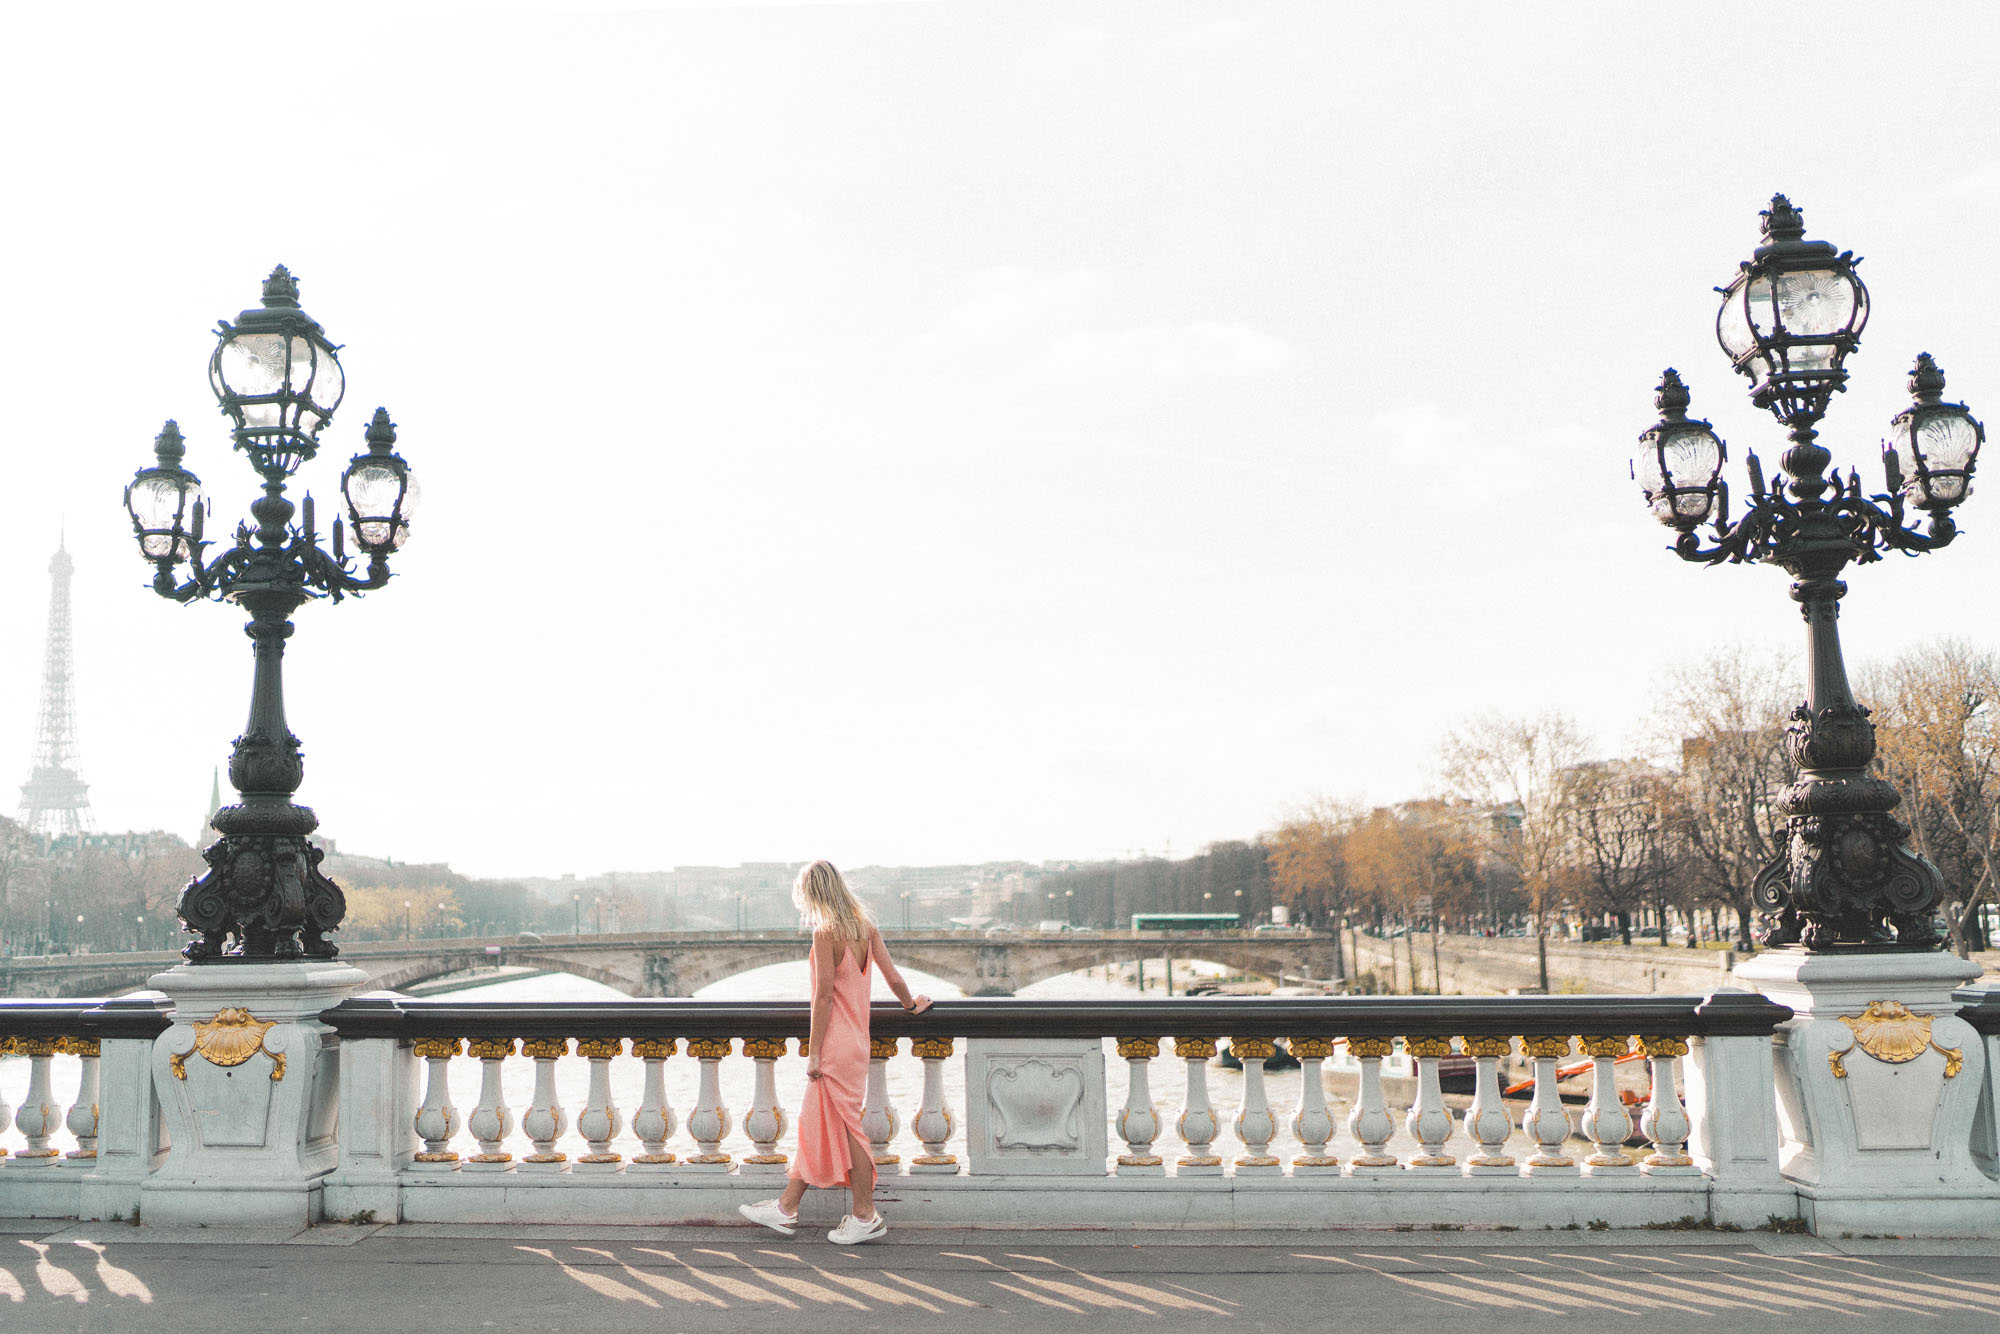 Beautiful bridges and views of the Seine in Paris, France - Pont Alexandre III 